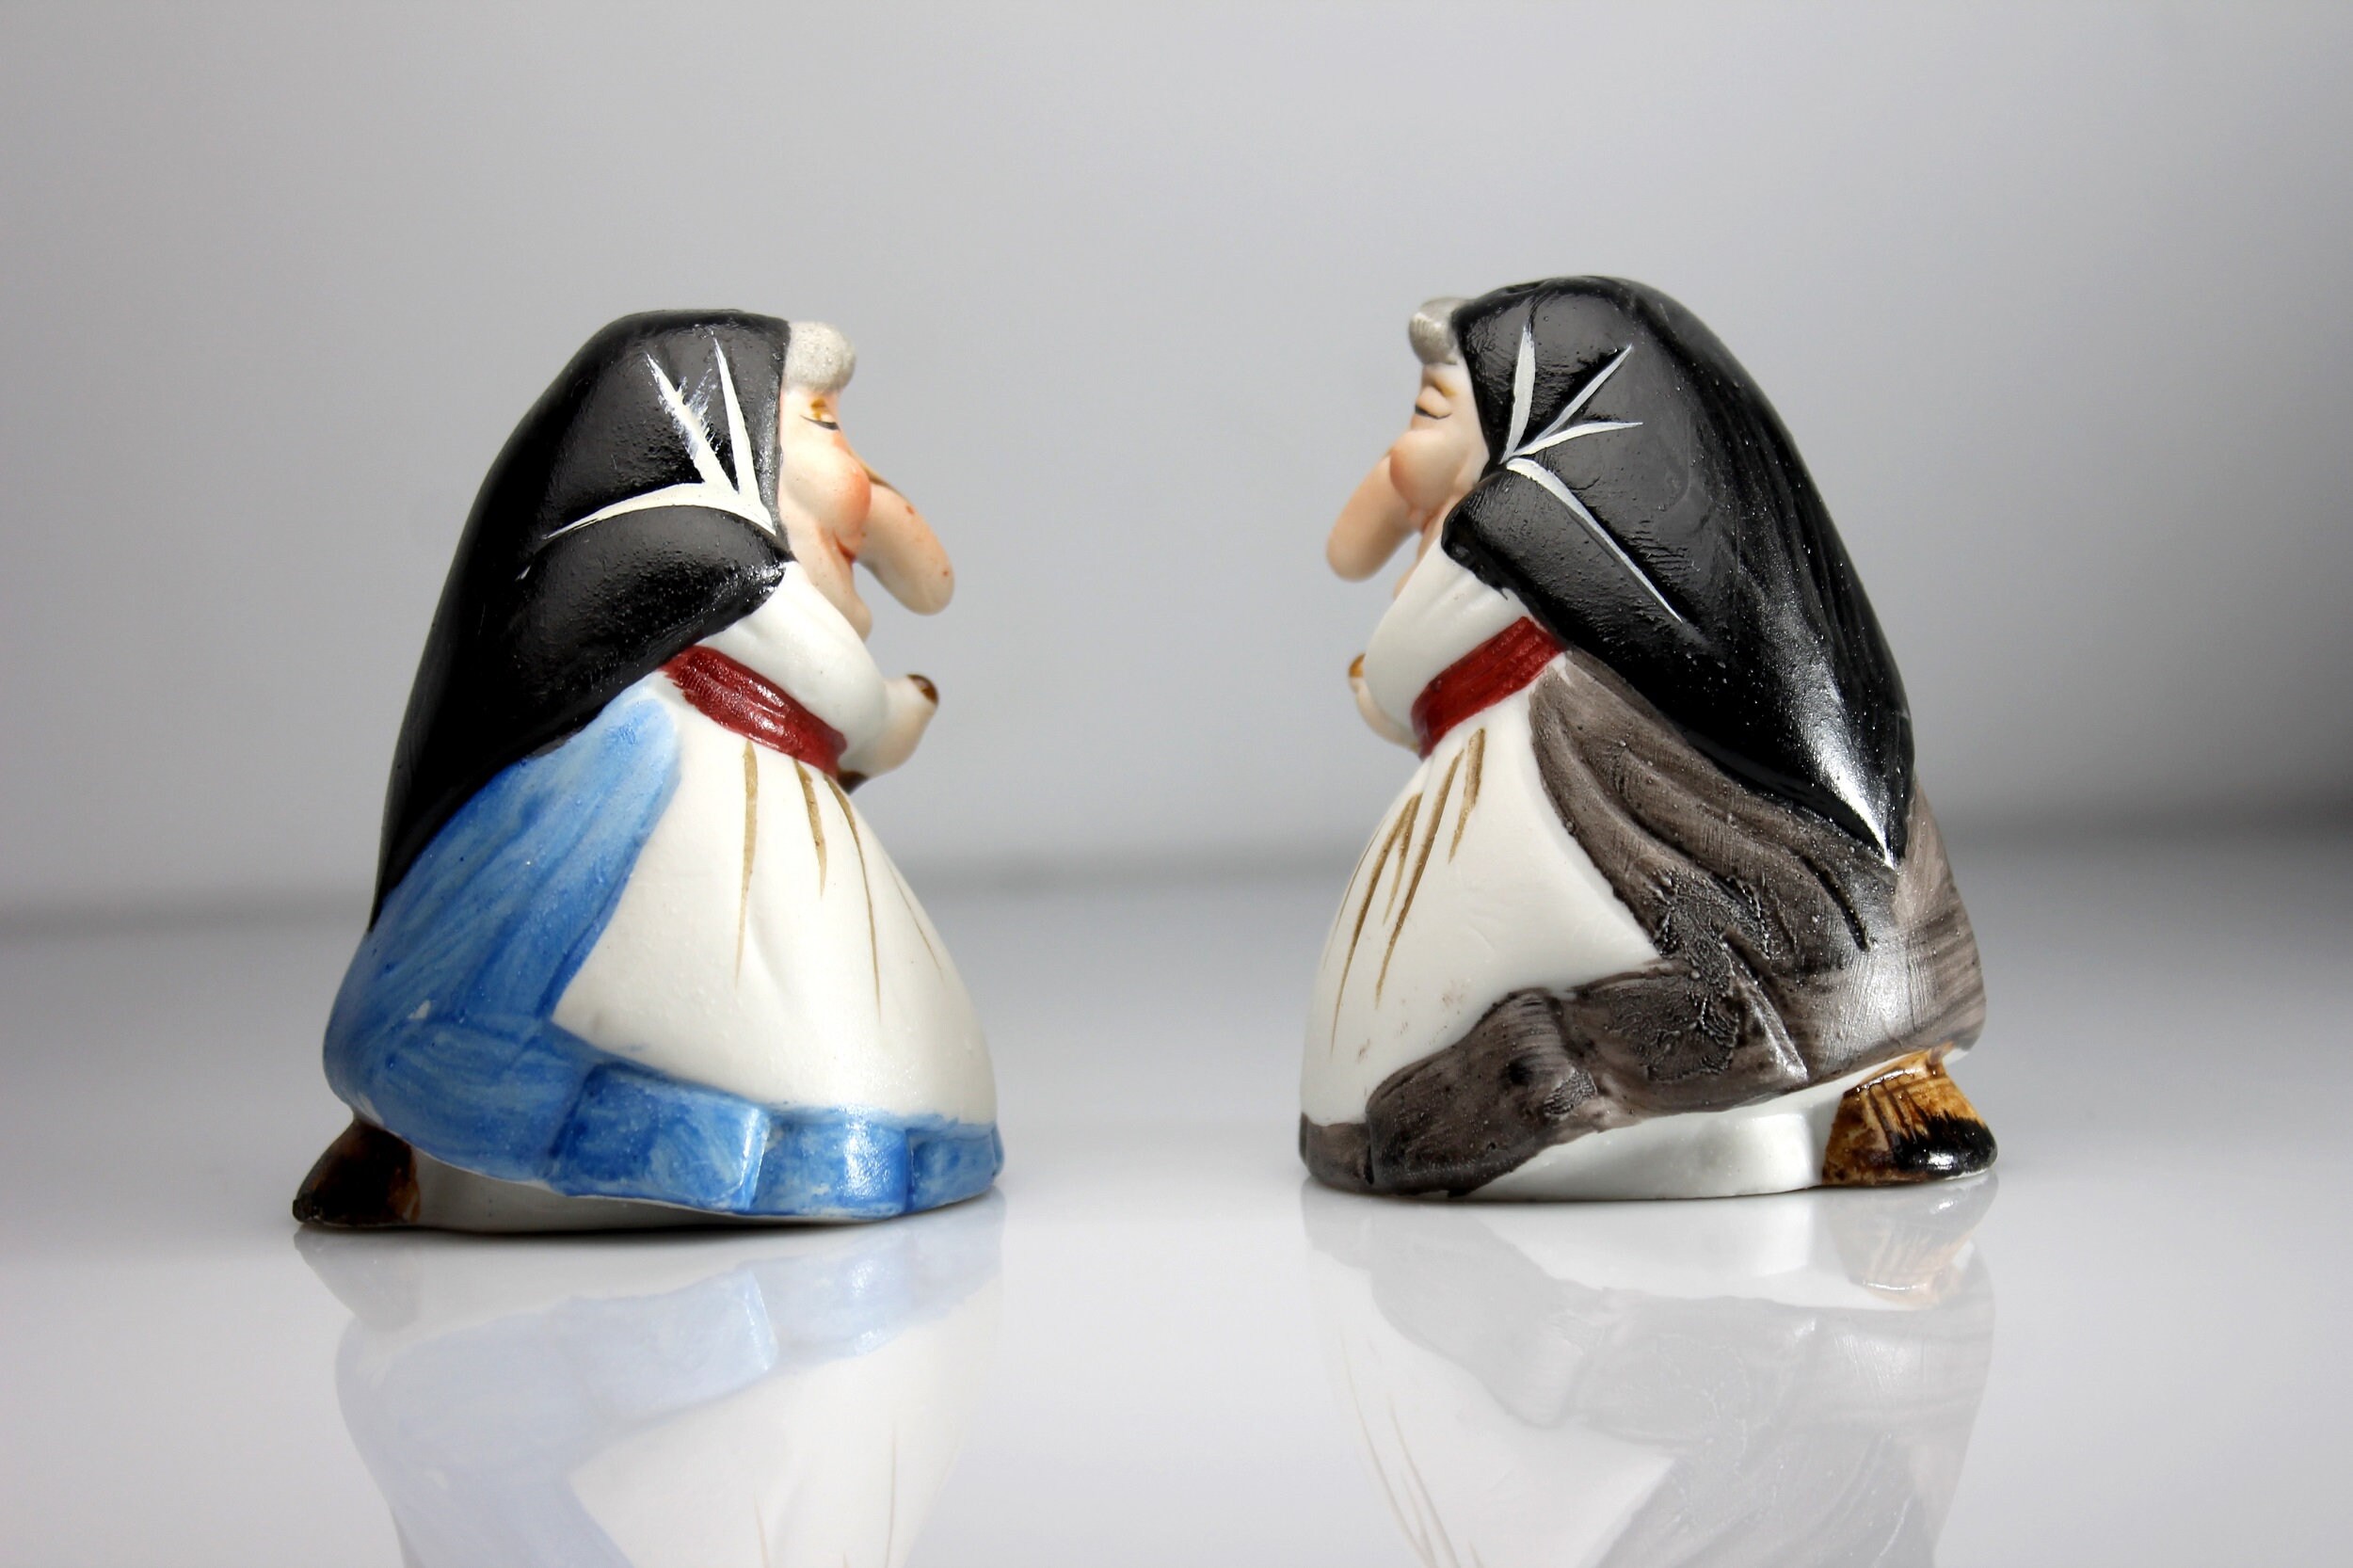 Good & Bad Witch Salt and Pepper Shakers Magnetic Ceramic Kitchen Set  Halloween for sale online